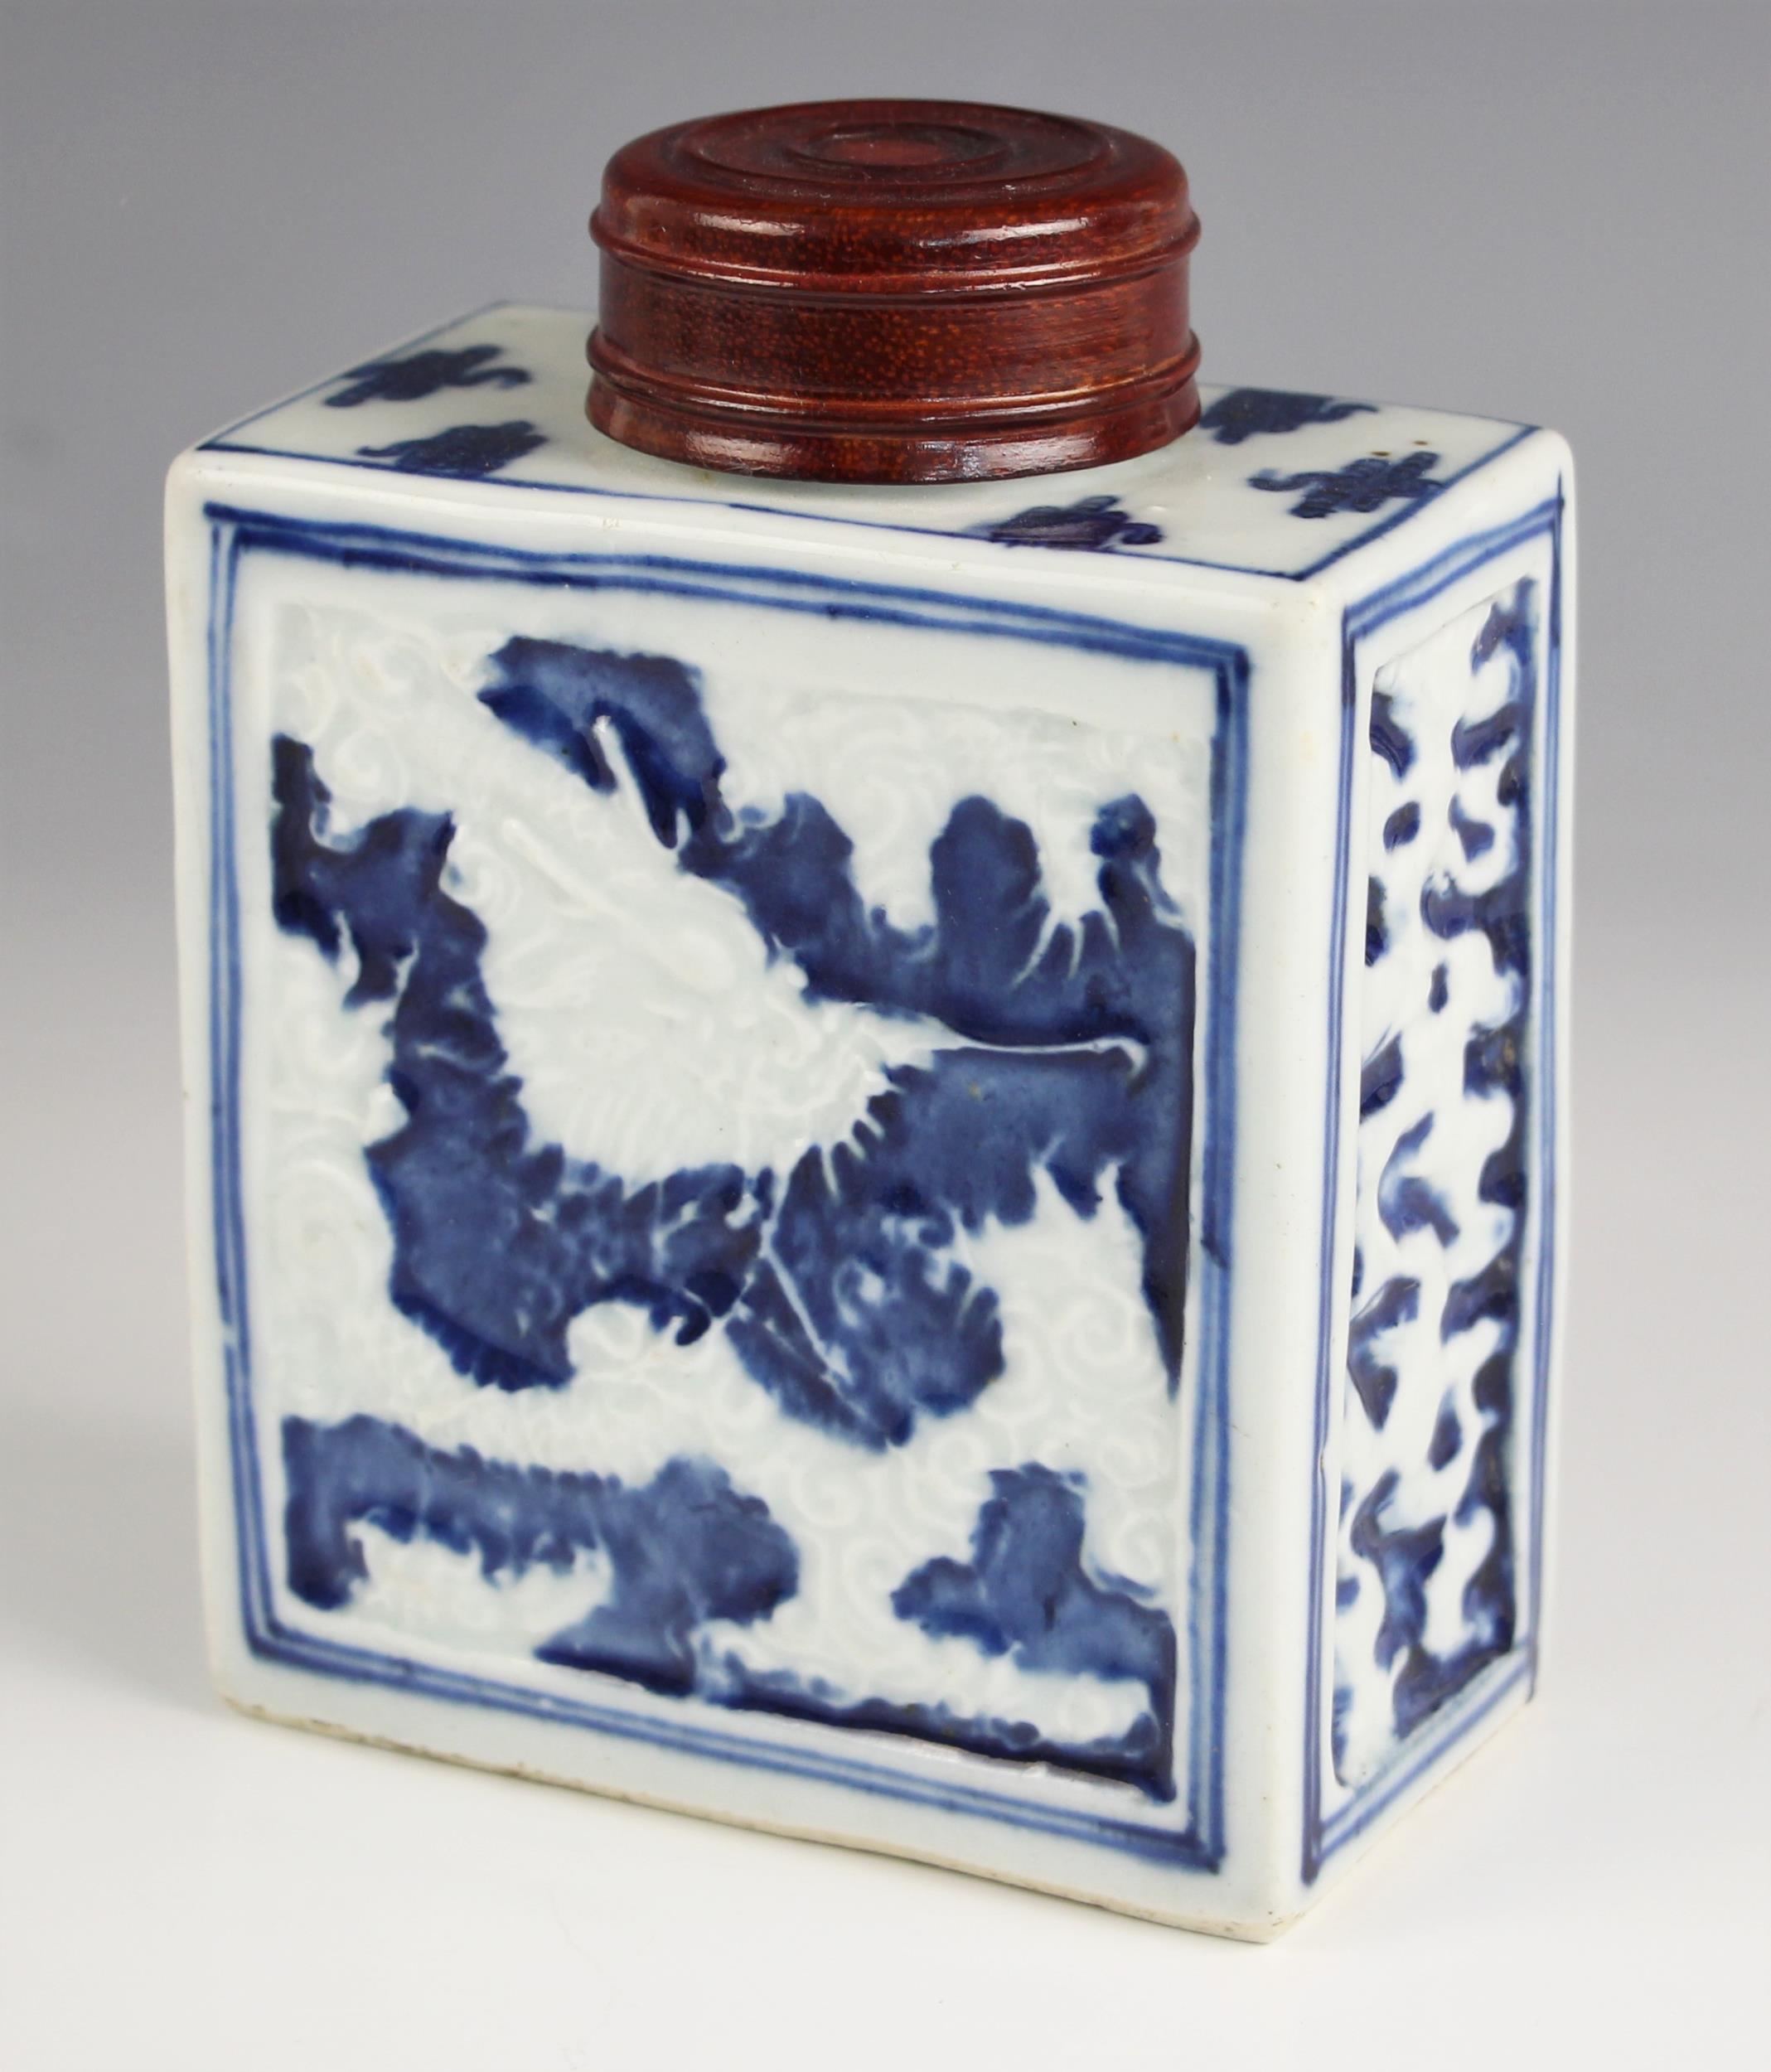 A Chinese porcelain blue and white tea caddy, 18th century, of rectangular form and relief decorated